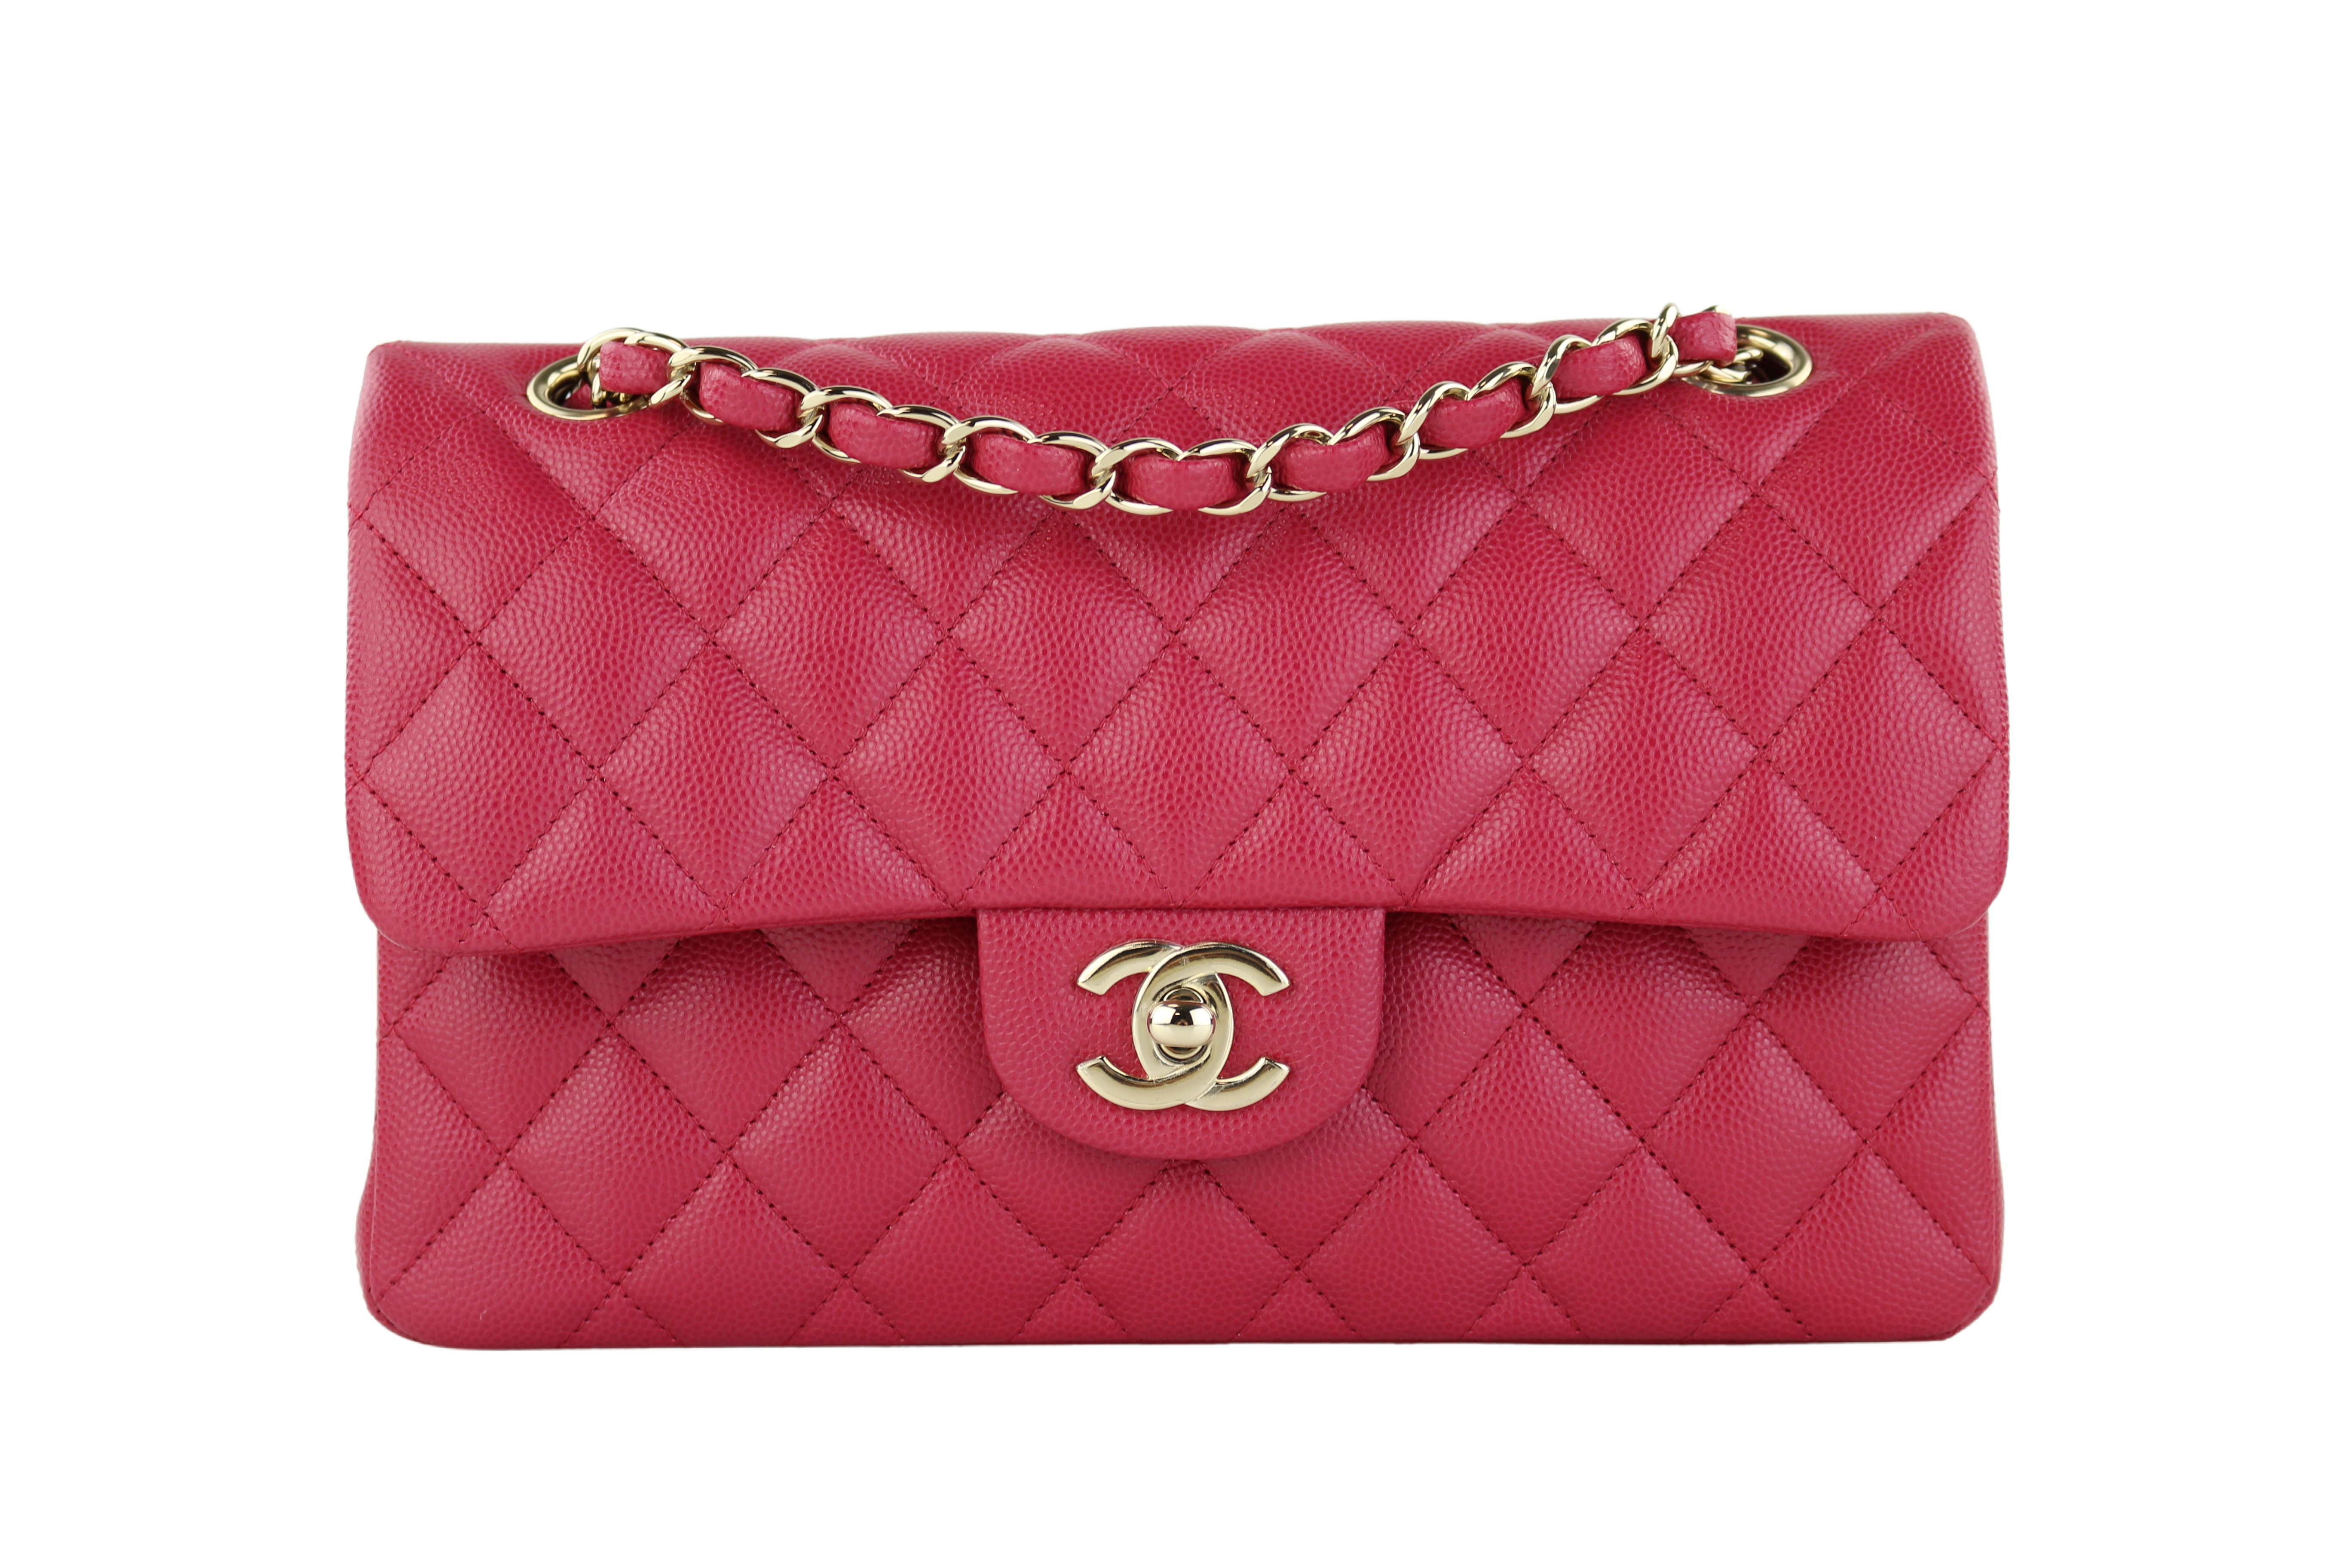 Chanel Classic Small Flap Bag: Yes, It's Small